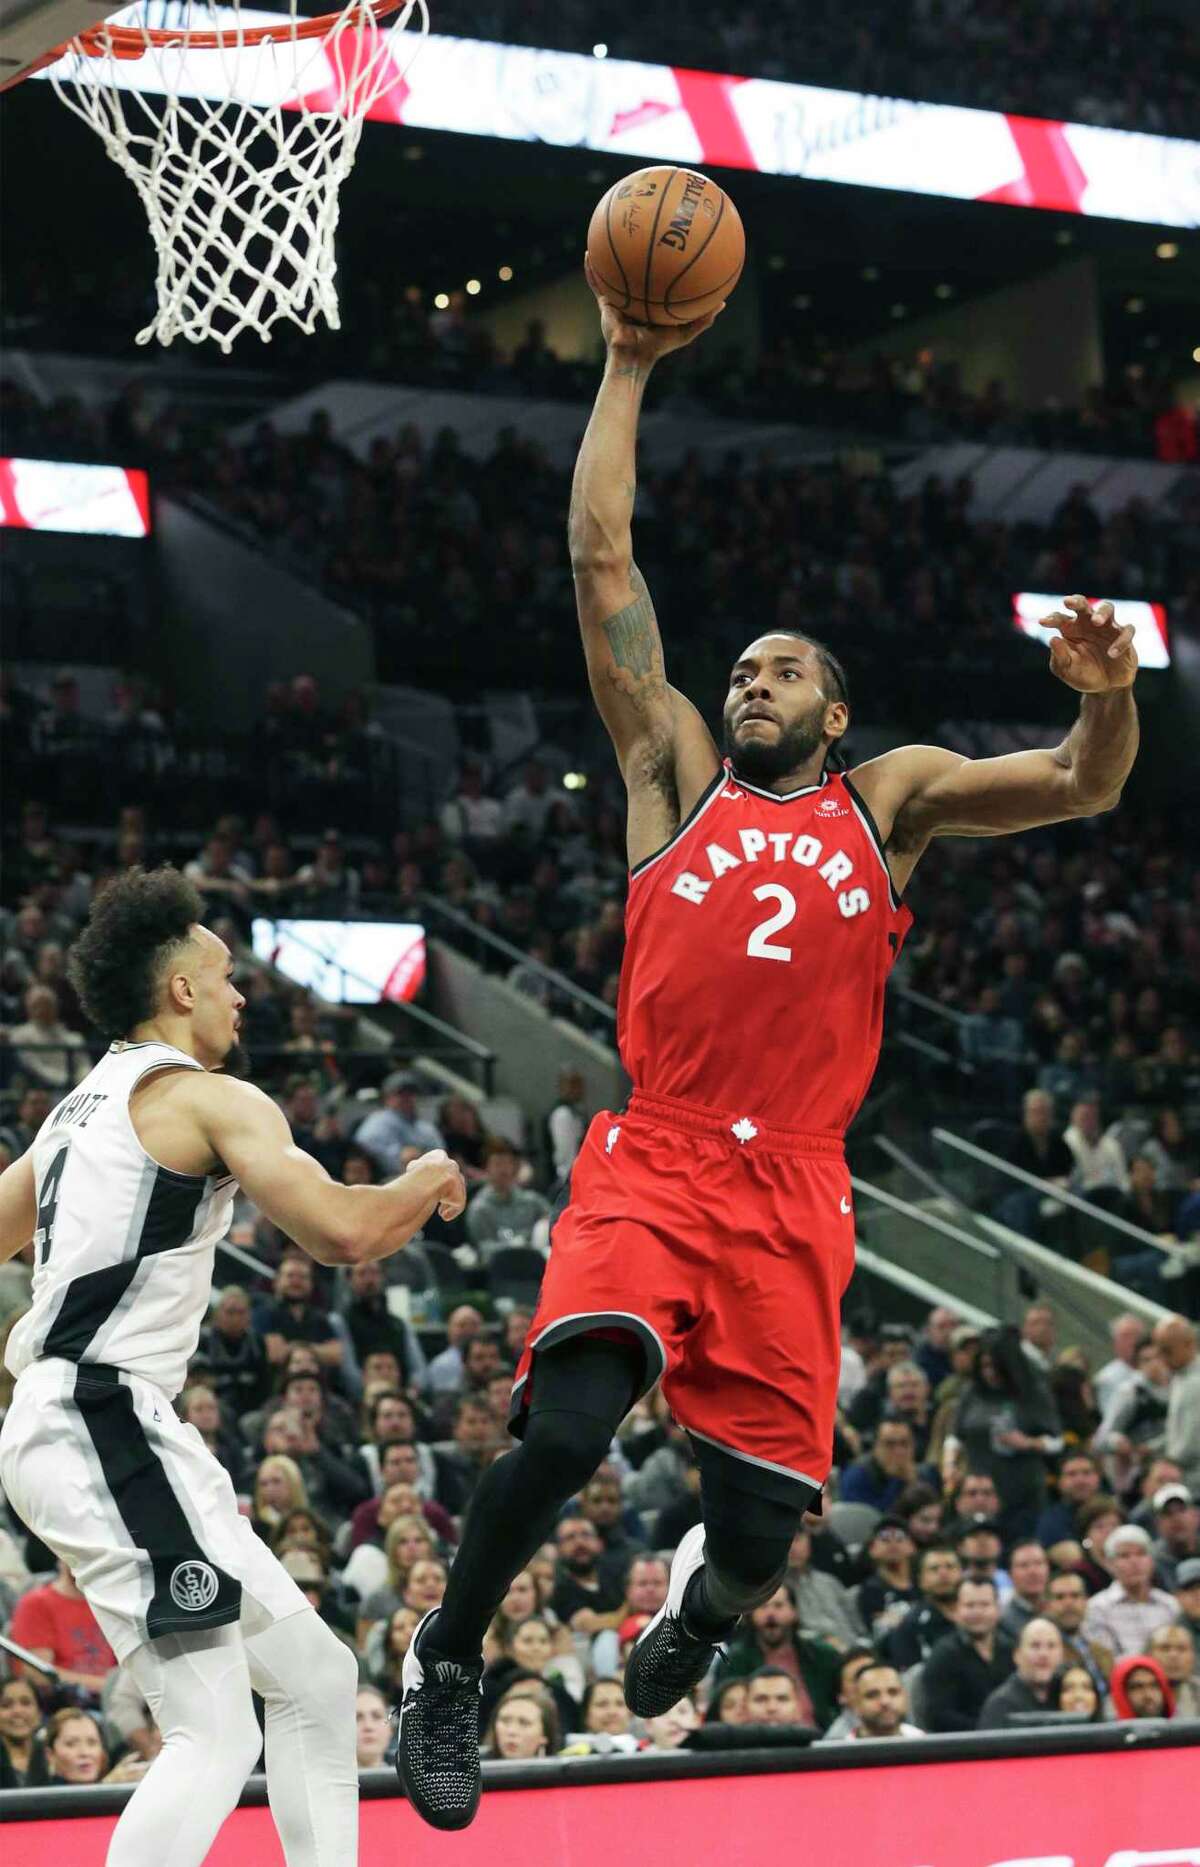 Kawhi Leonard goes up for a slam in the second half as the Spurs host the Raptors at the AT&T Center on January 3, 2019.